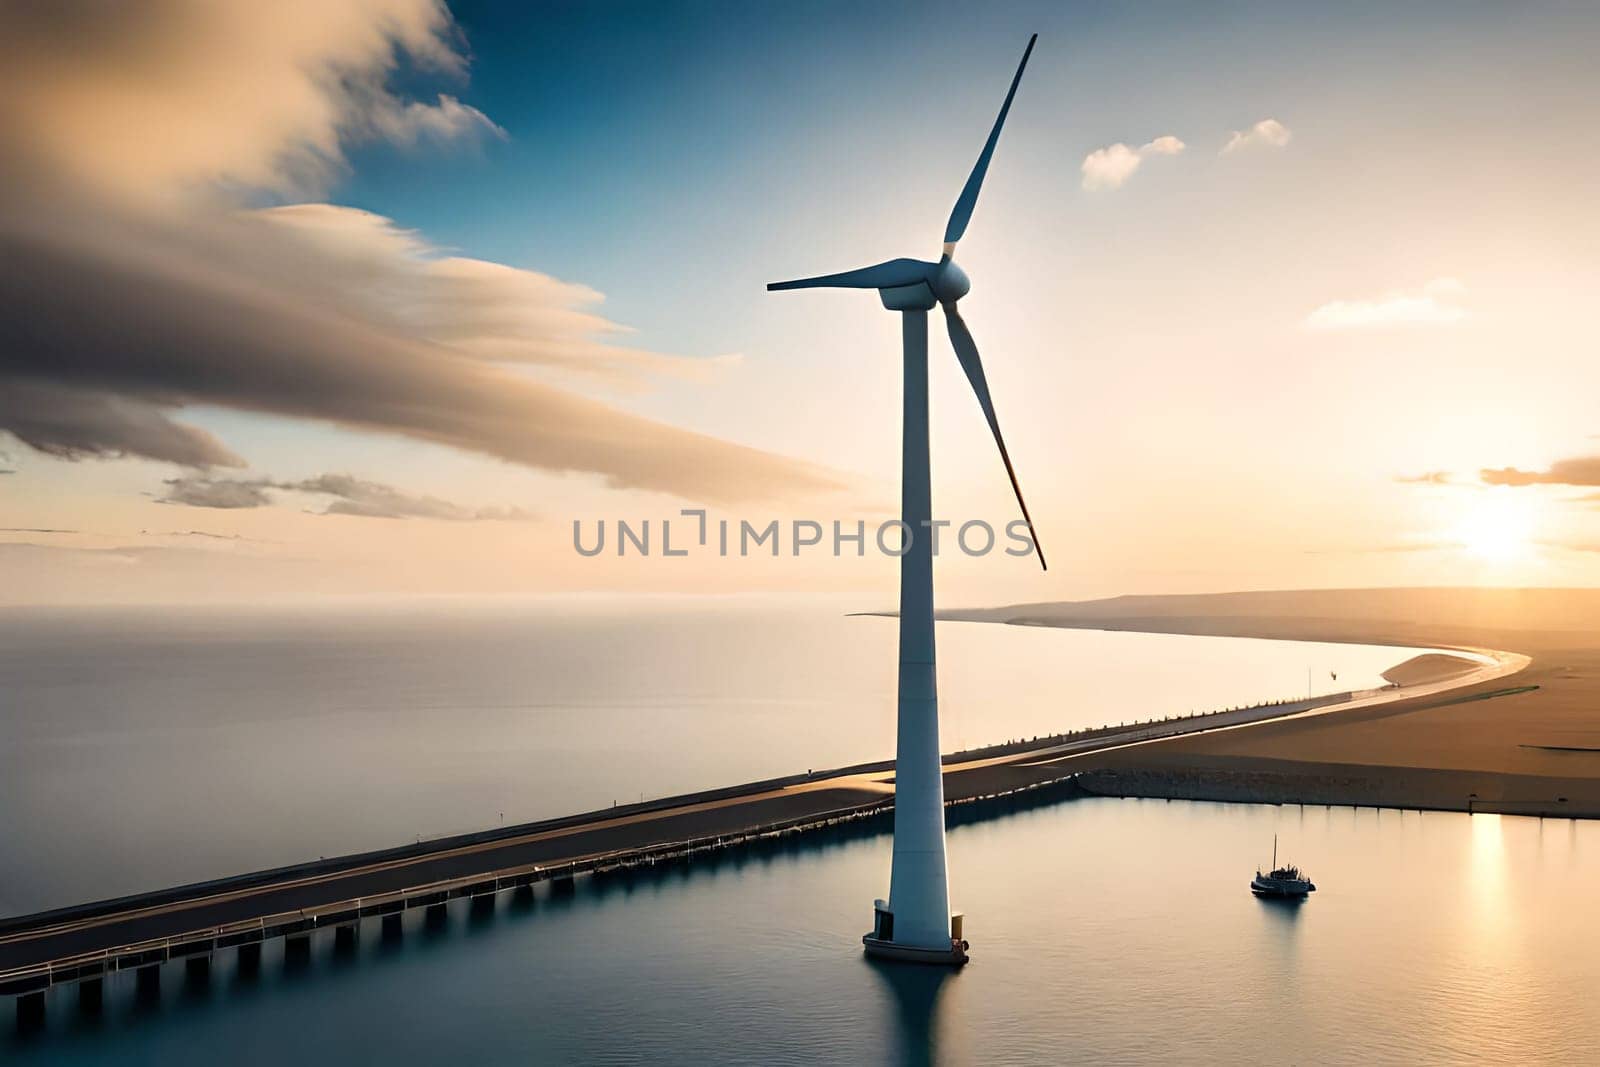 Panoramic view of wind farm with high wind turbines by milastokerpro